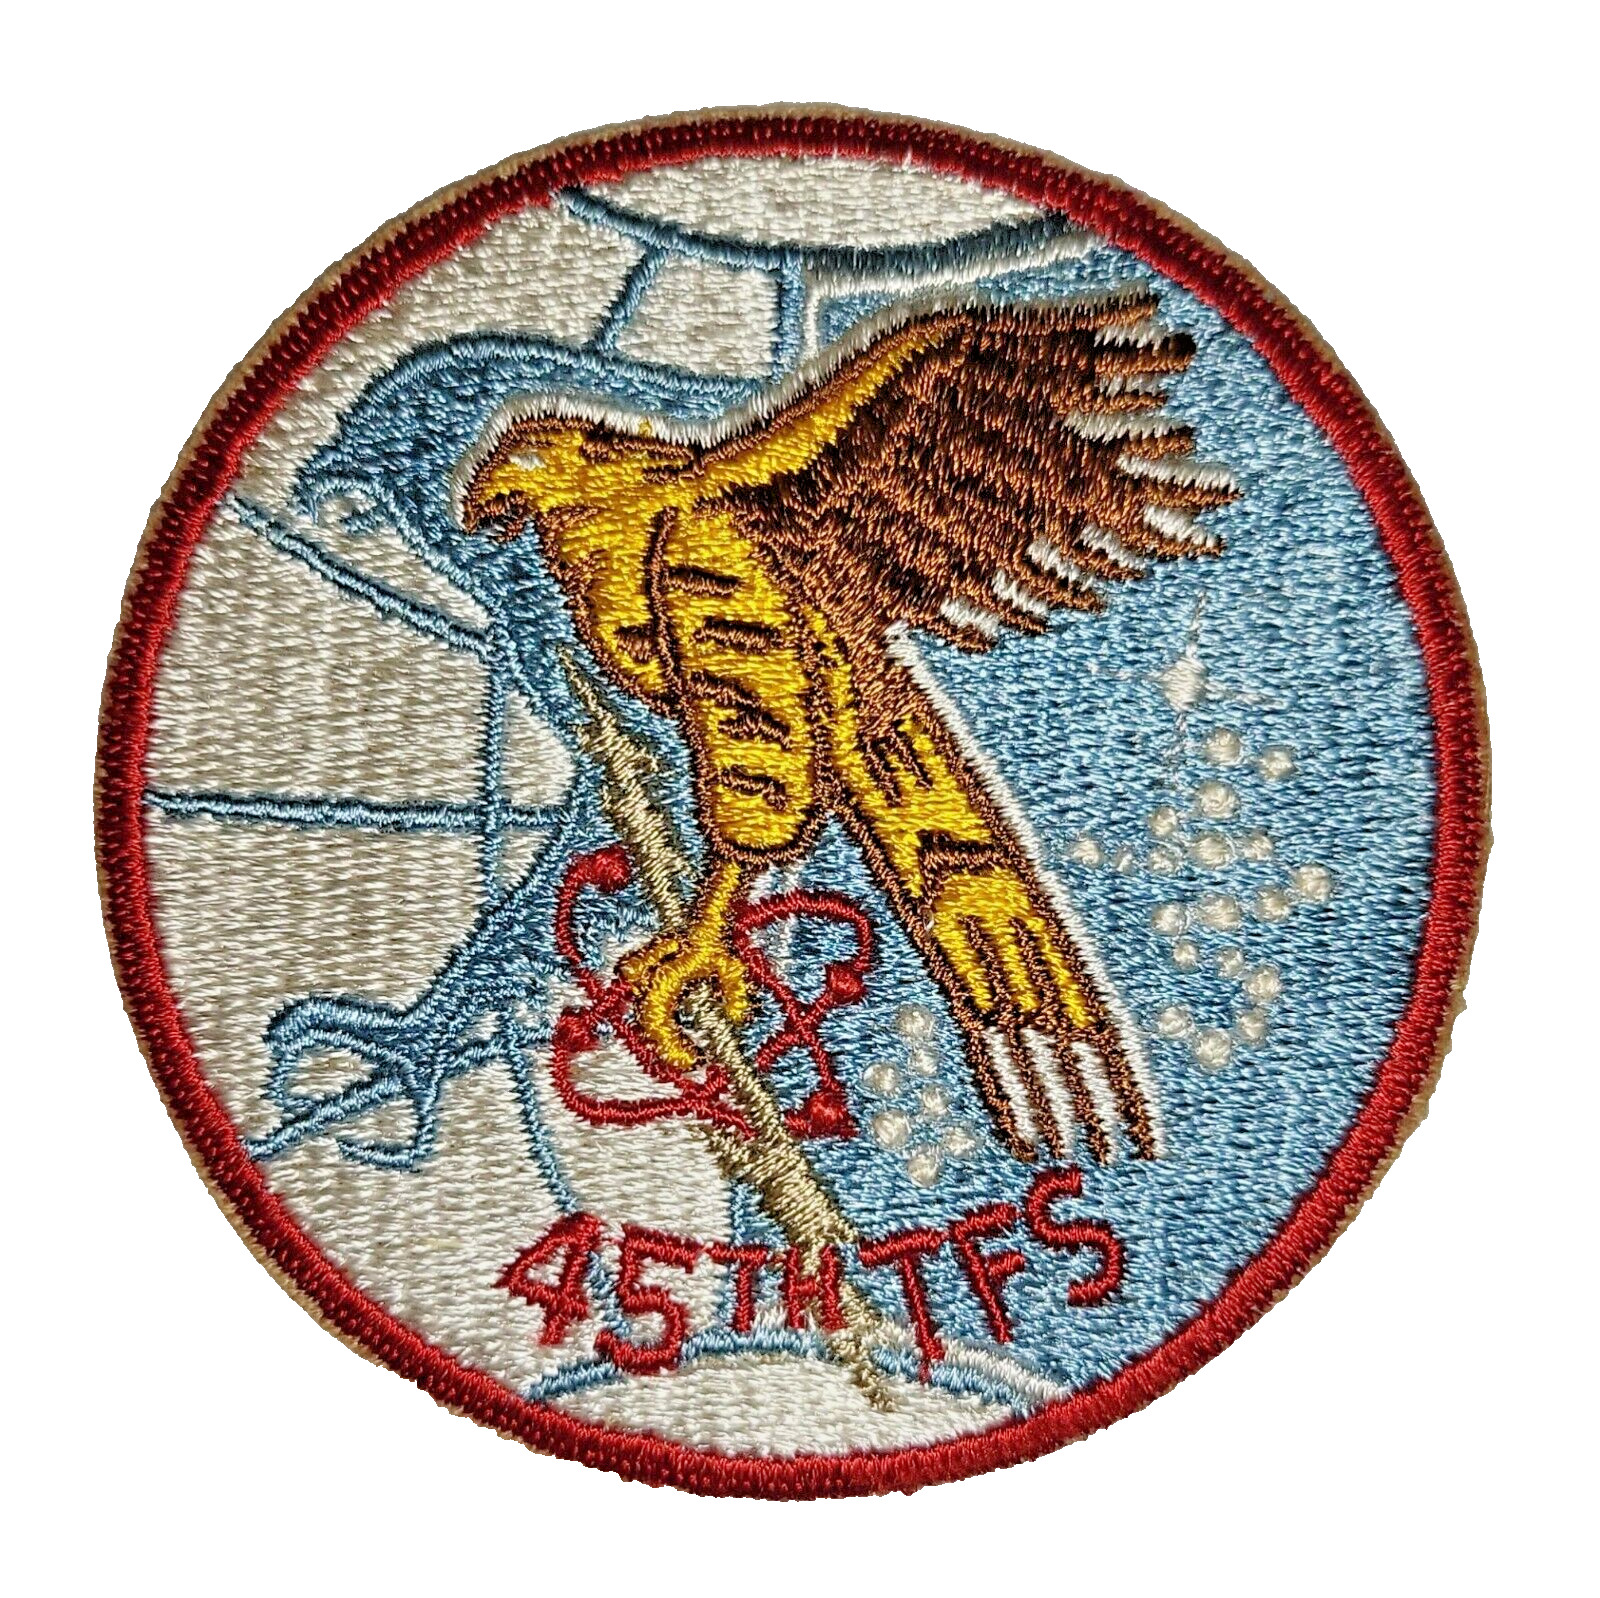 US Air Force 45th TFS Patch (45th Figther Squadron)